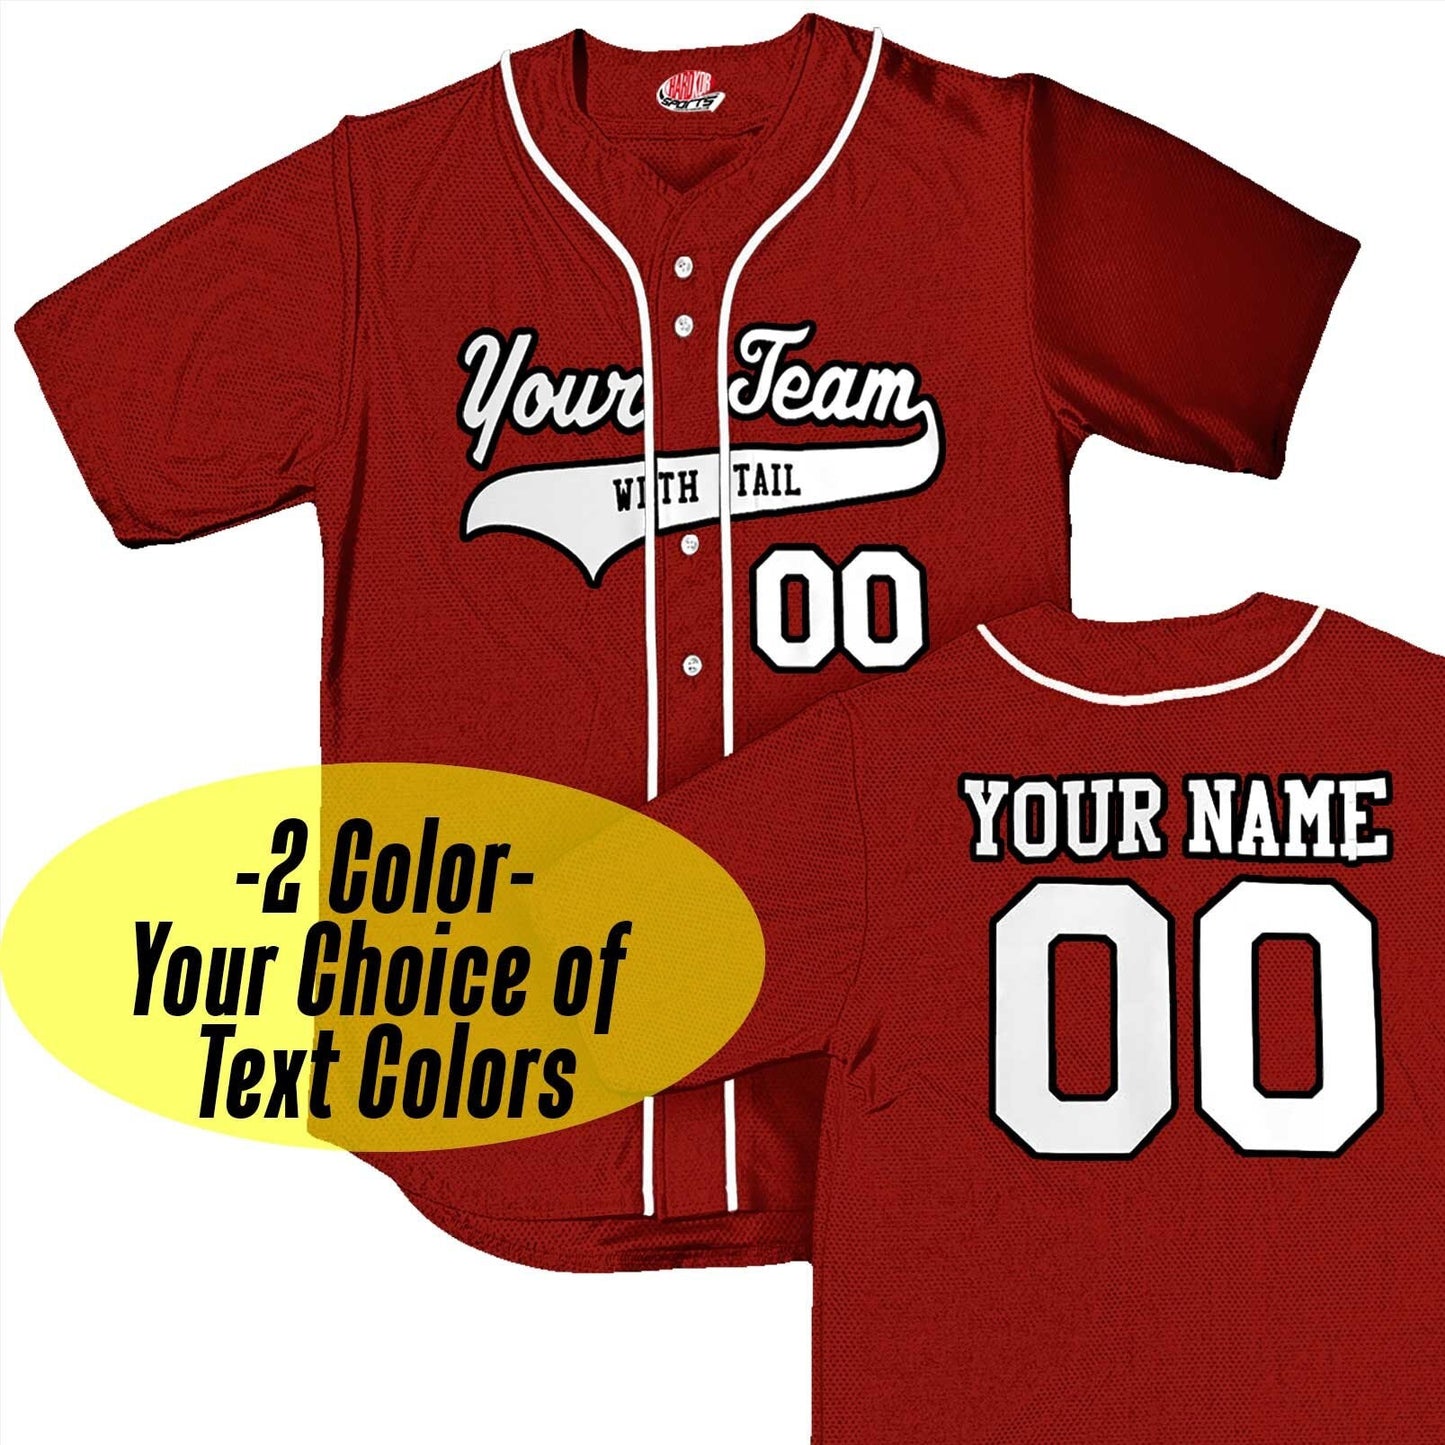 Design Your Own Hip Hop 2 Color Print Custom Maroon Baseball Jersey with White Piping | Customized Team Logo Graphic